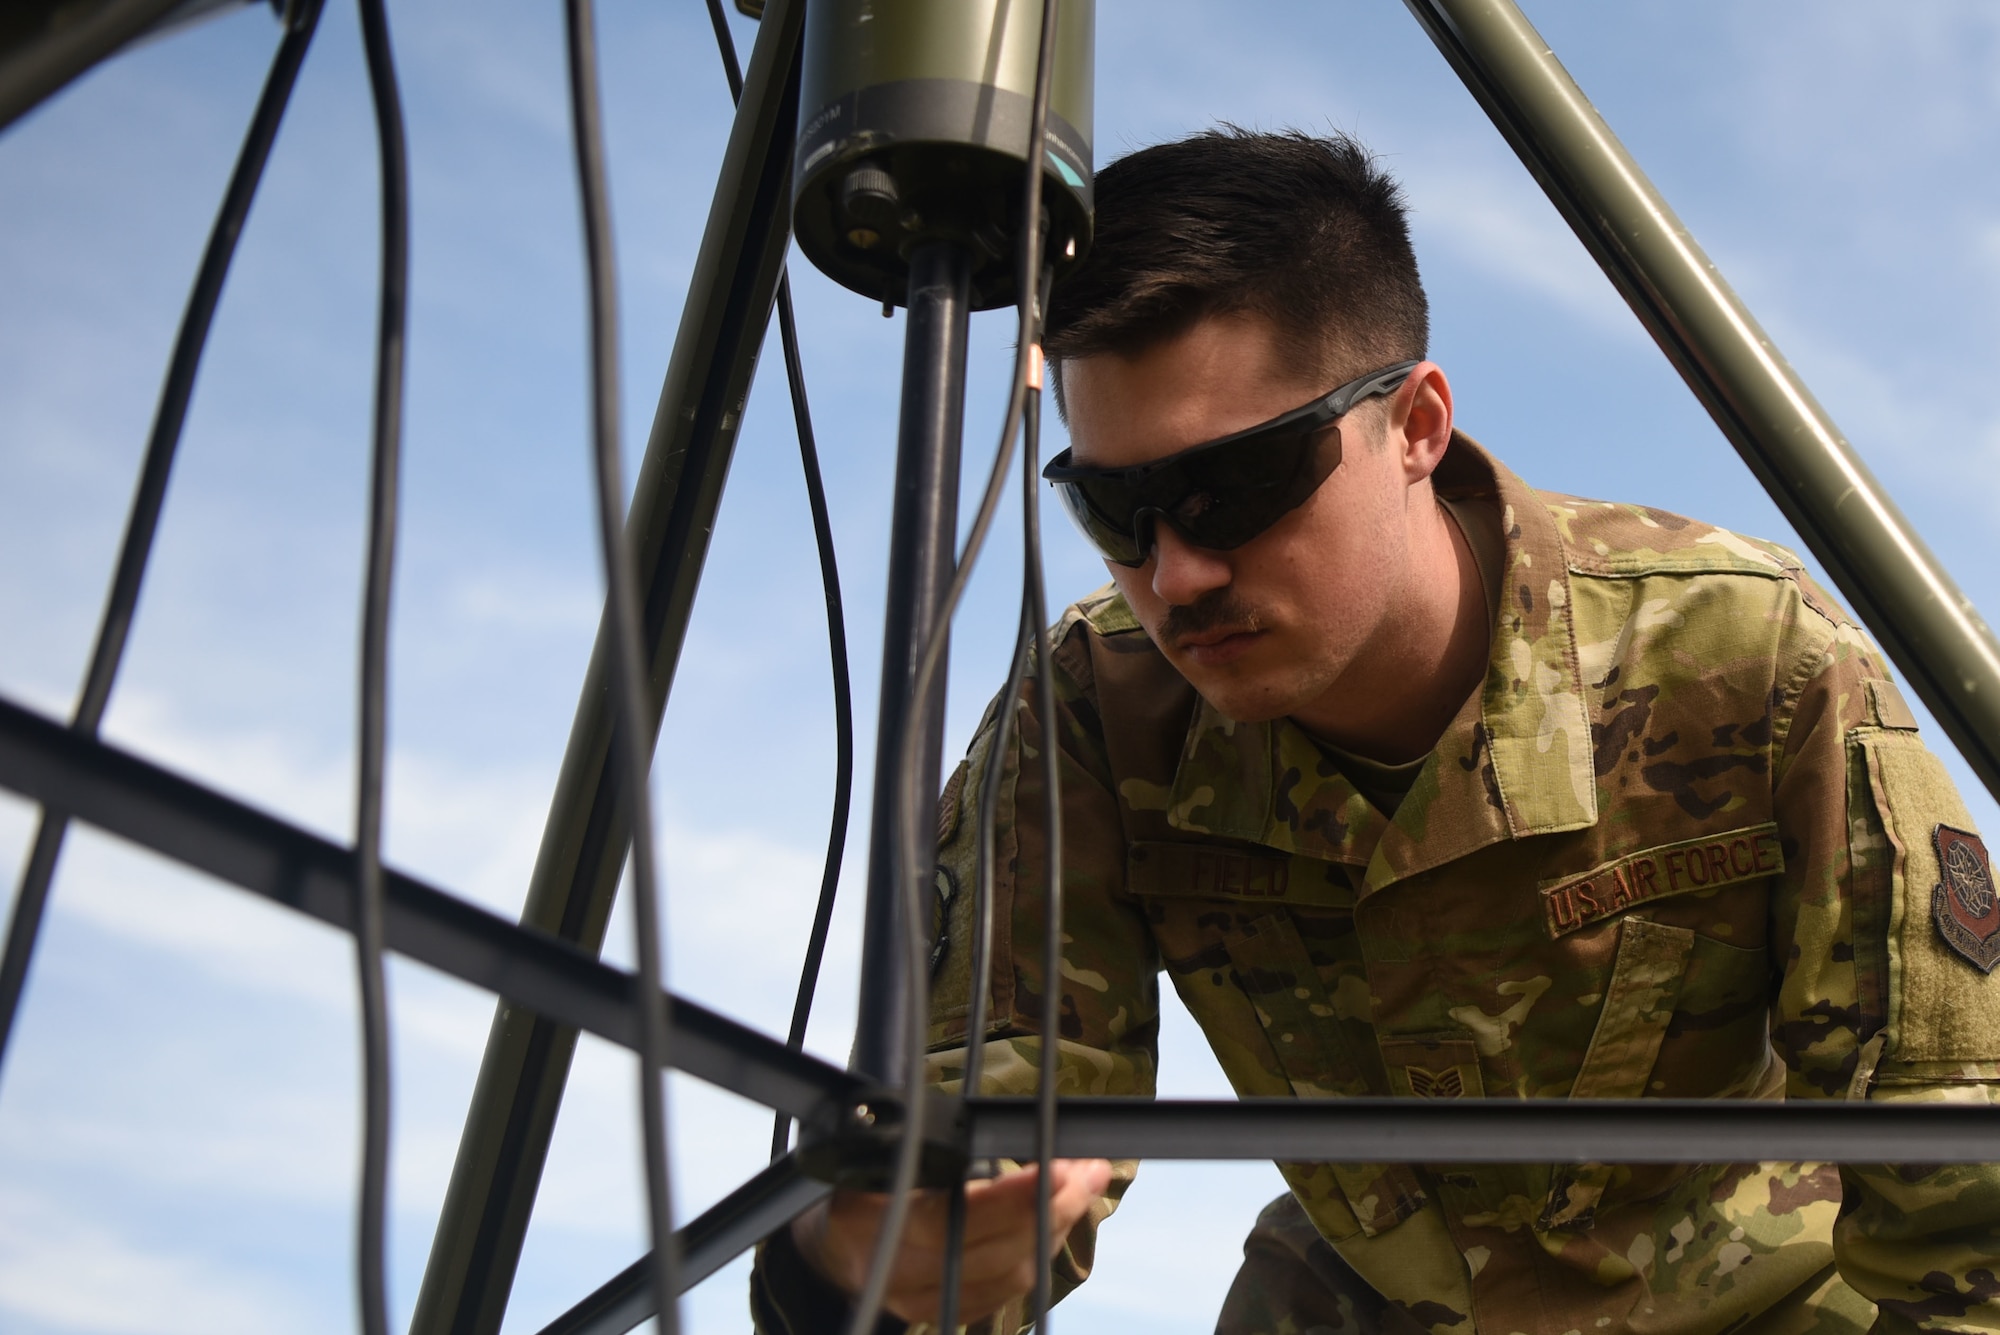 Staff Sgt.Jordan Field, 22nd Operation Support Squadron weather forecaster, checks the level of the tactical meteorological observing system March 26, 2020, at McConnell Air Force Base, Kansas. Field used a bullseye level to ensure the TMQ-53 is level in order to get accurate readings on the wind direction. The TMQ-53 is a portable, automated weather system that makes observations on all types of weather in five second intervals. This information is then sent to a laptop where a forecast can be developed. (U.S. Air Force photo by Senior Airman Alexi Bosarge)